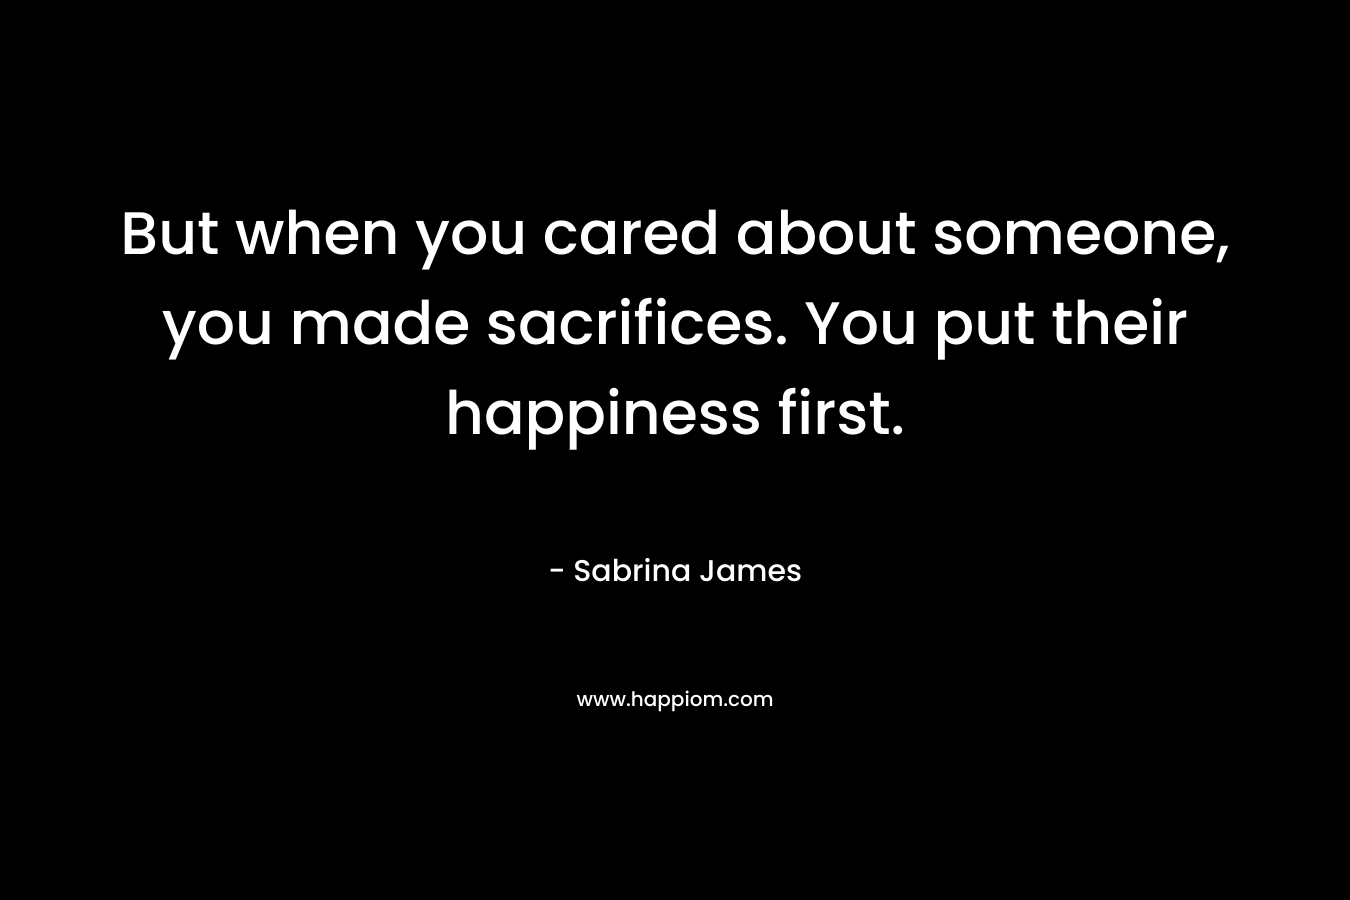 But when you cared about someone, you made sacrifices. You put their happiness first. – Sabrina James